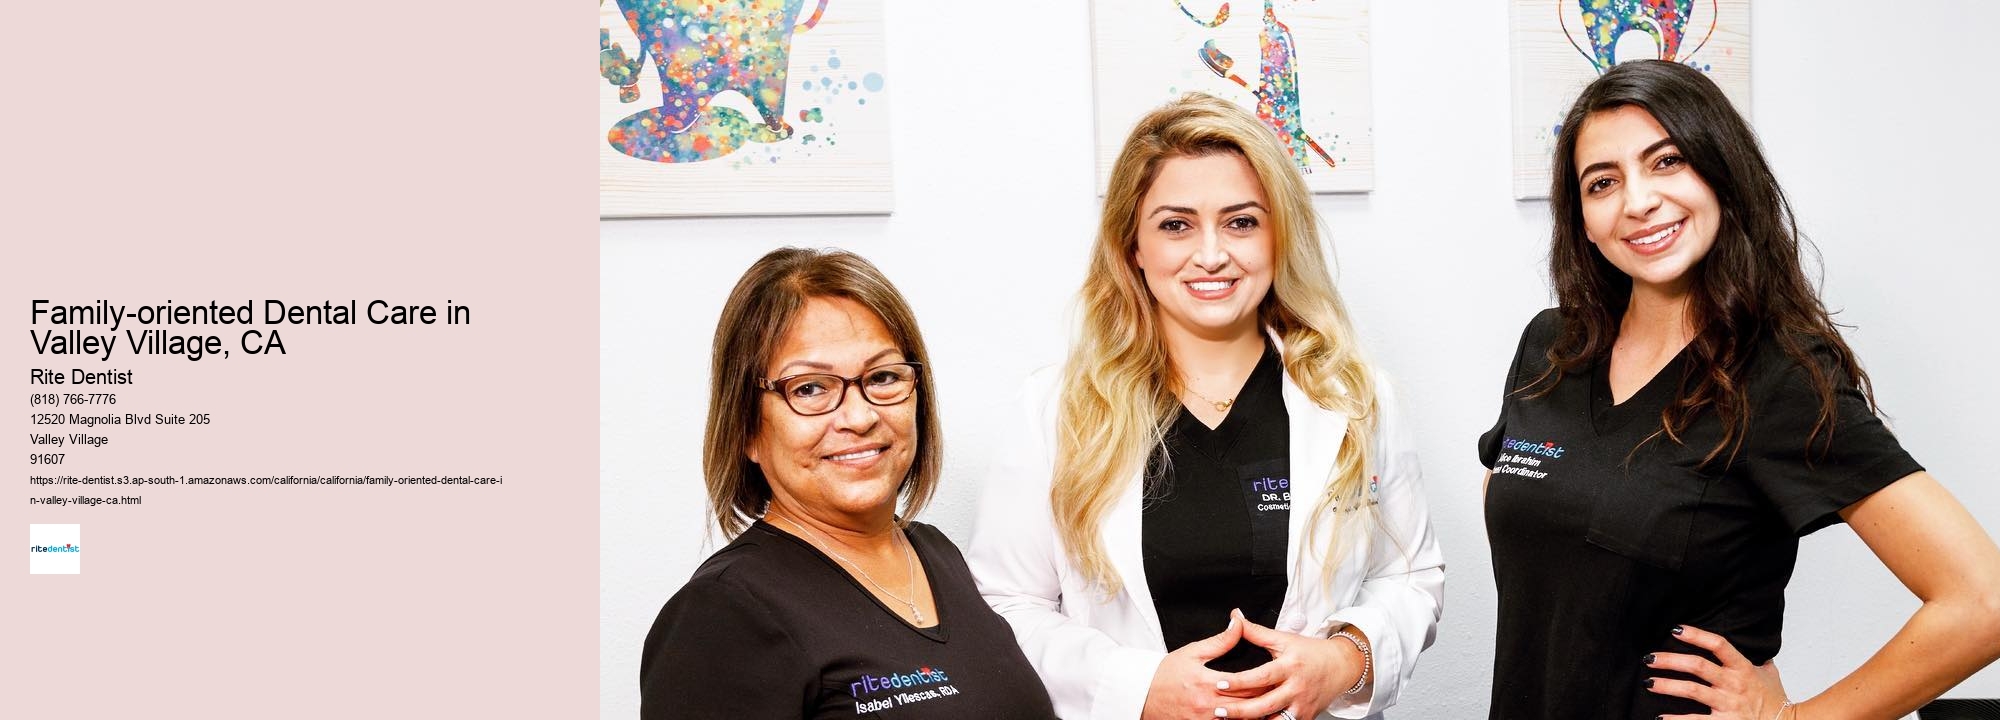 Family-oriented Dental Care in Valley Village, CA